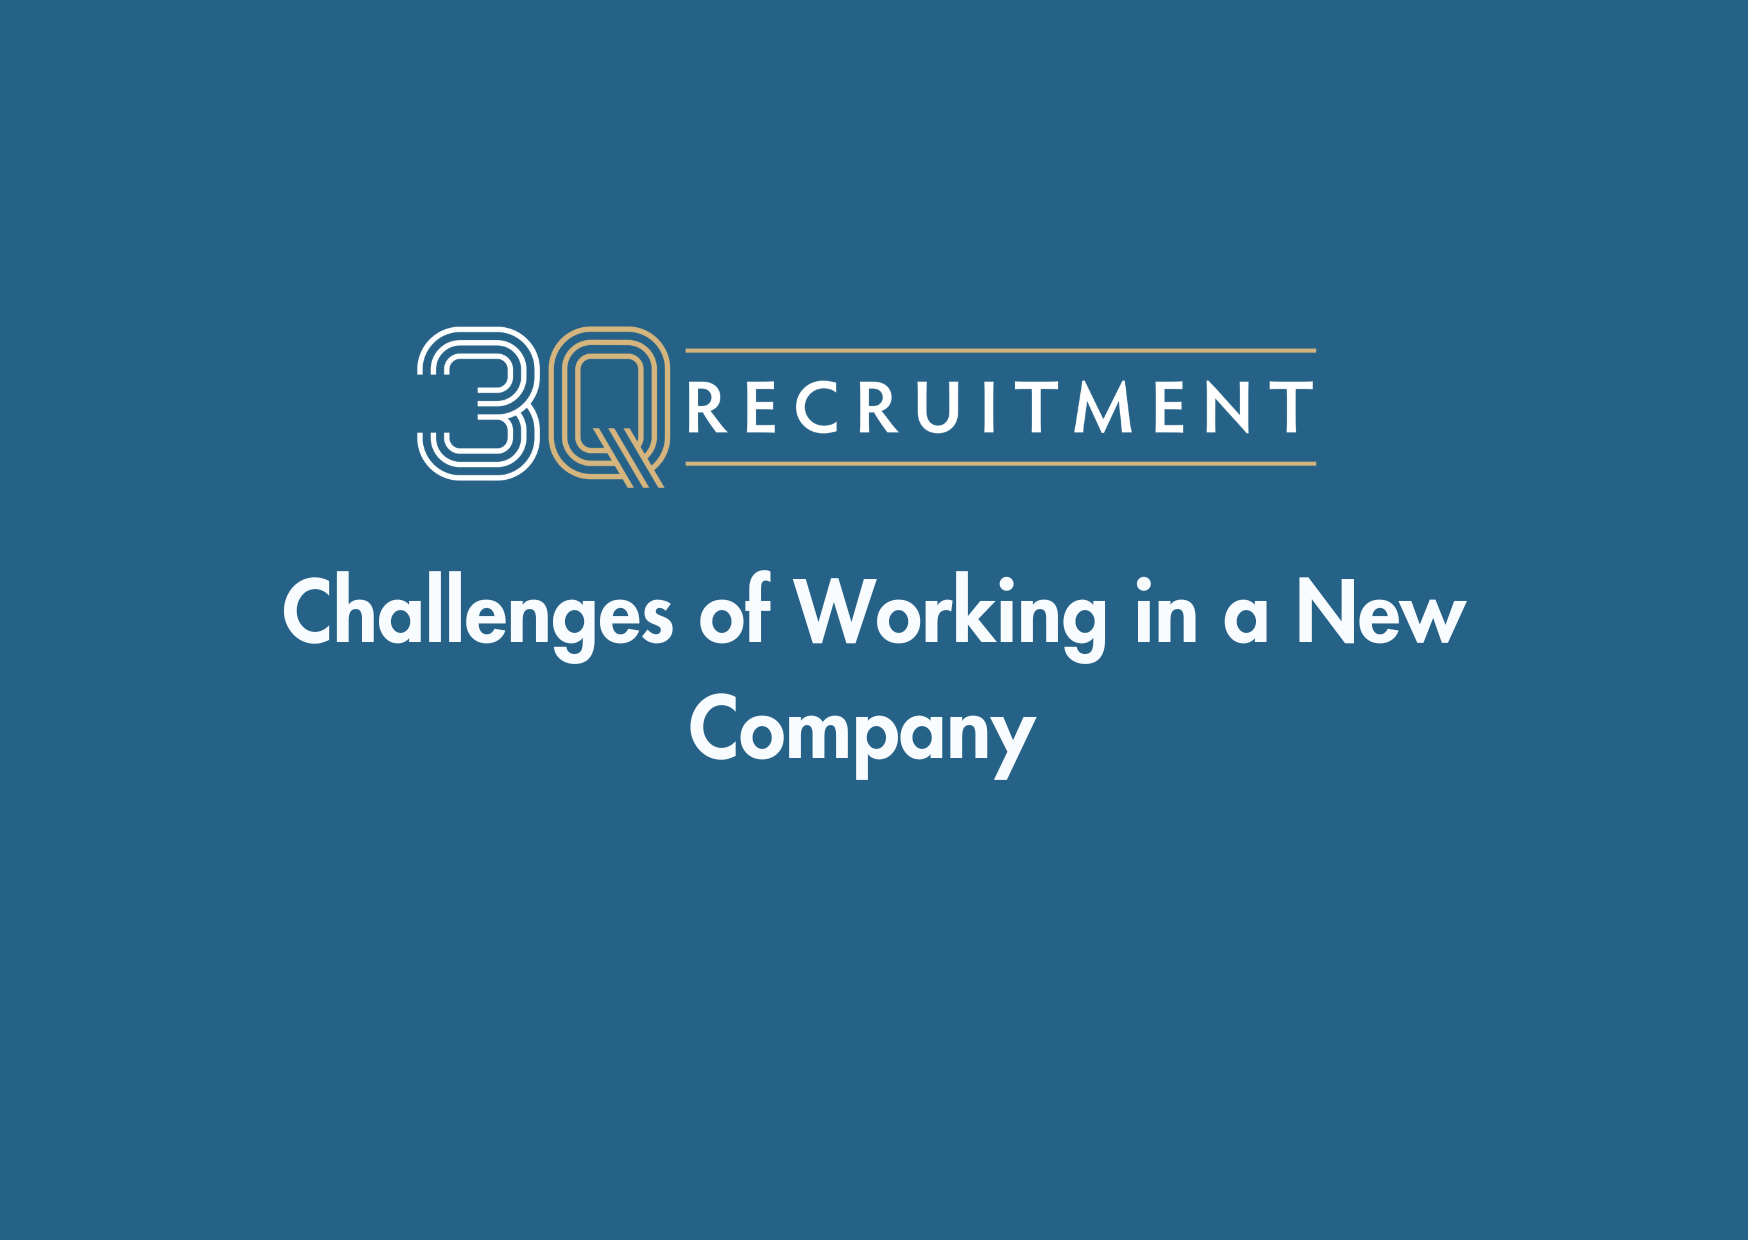 3Q Recruitment Challenges of Working in a New Company